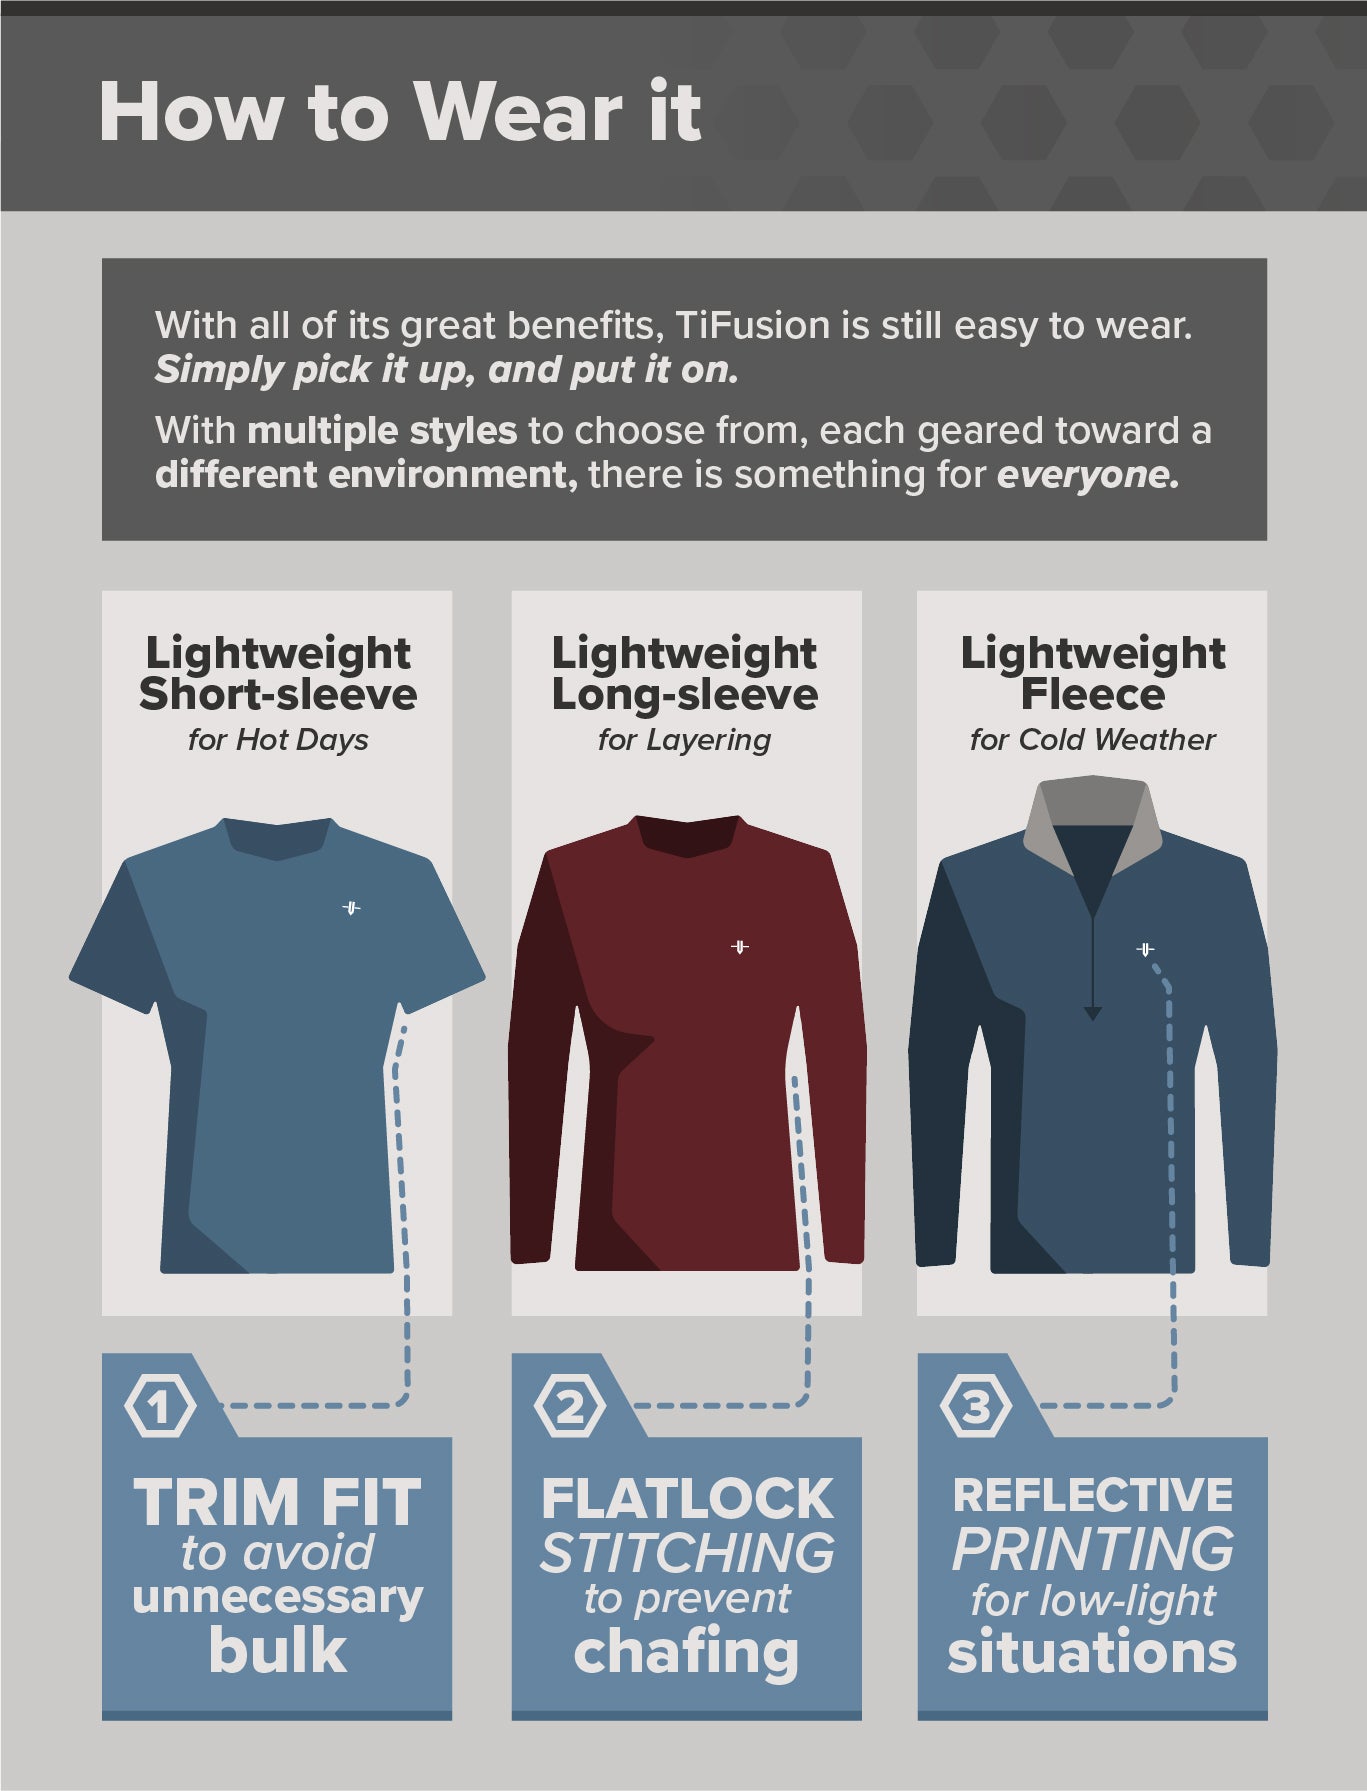 What You Need To Know About Titanium Infused Apparel – VARGO